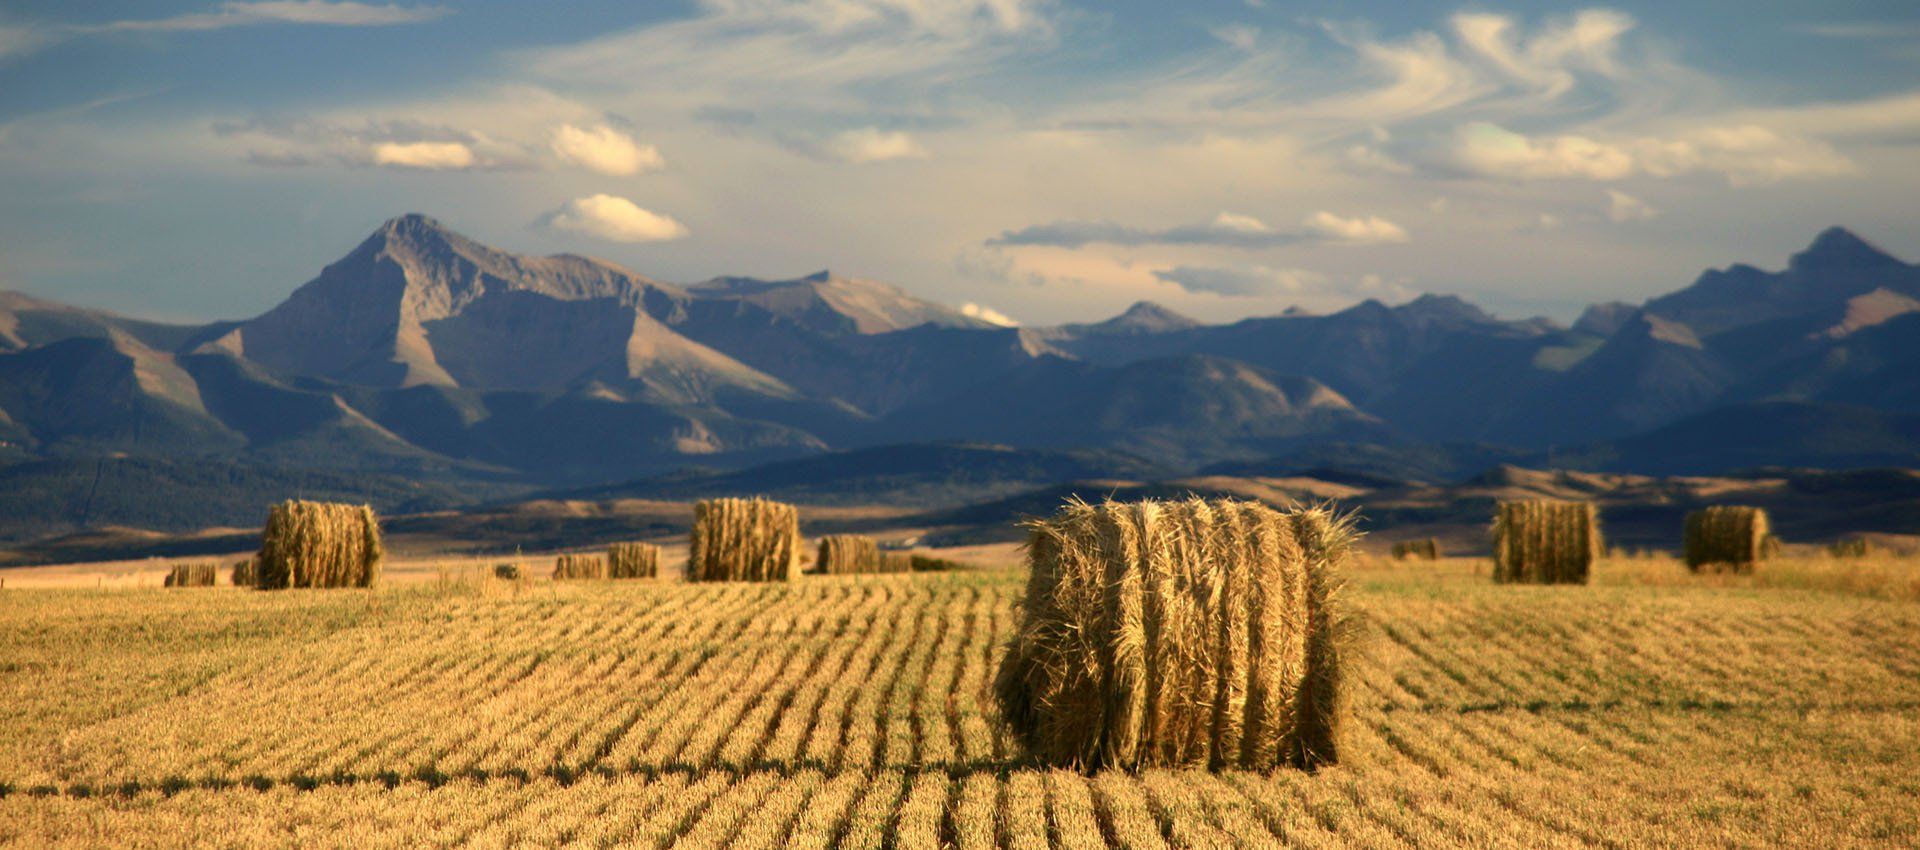 Farmland in the foreground of mountains